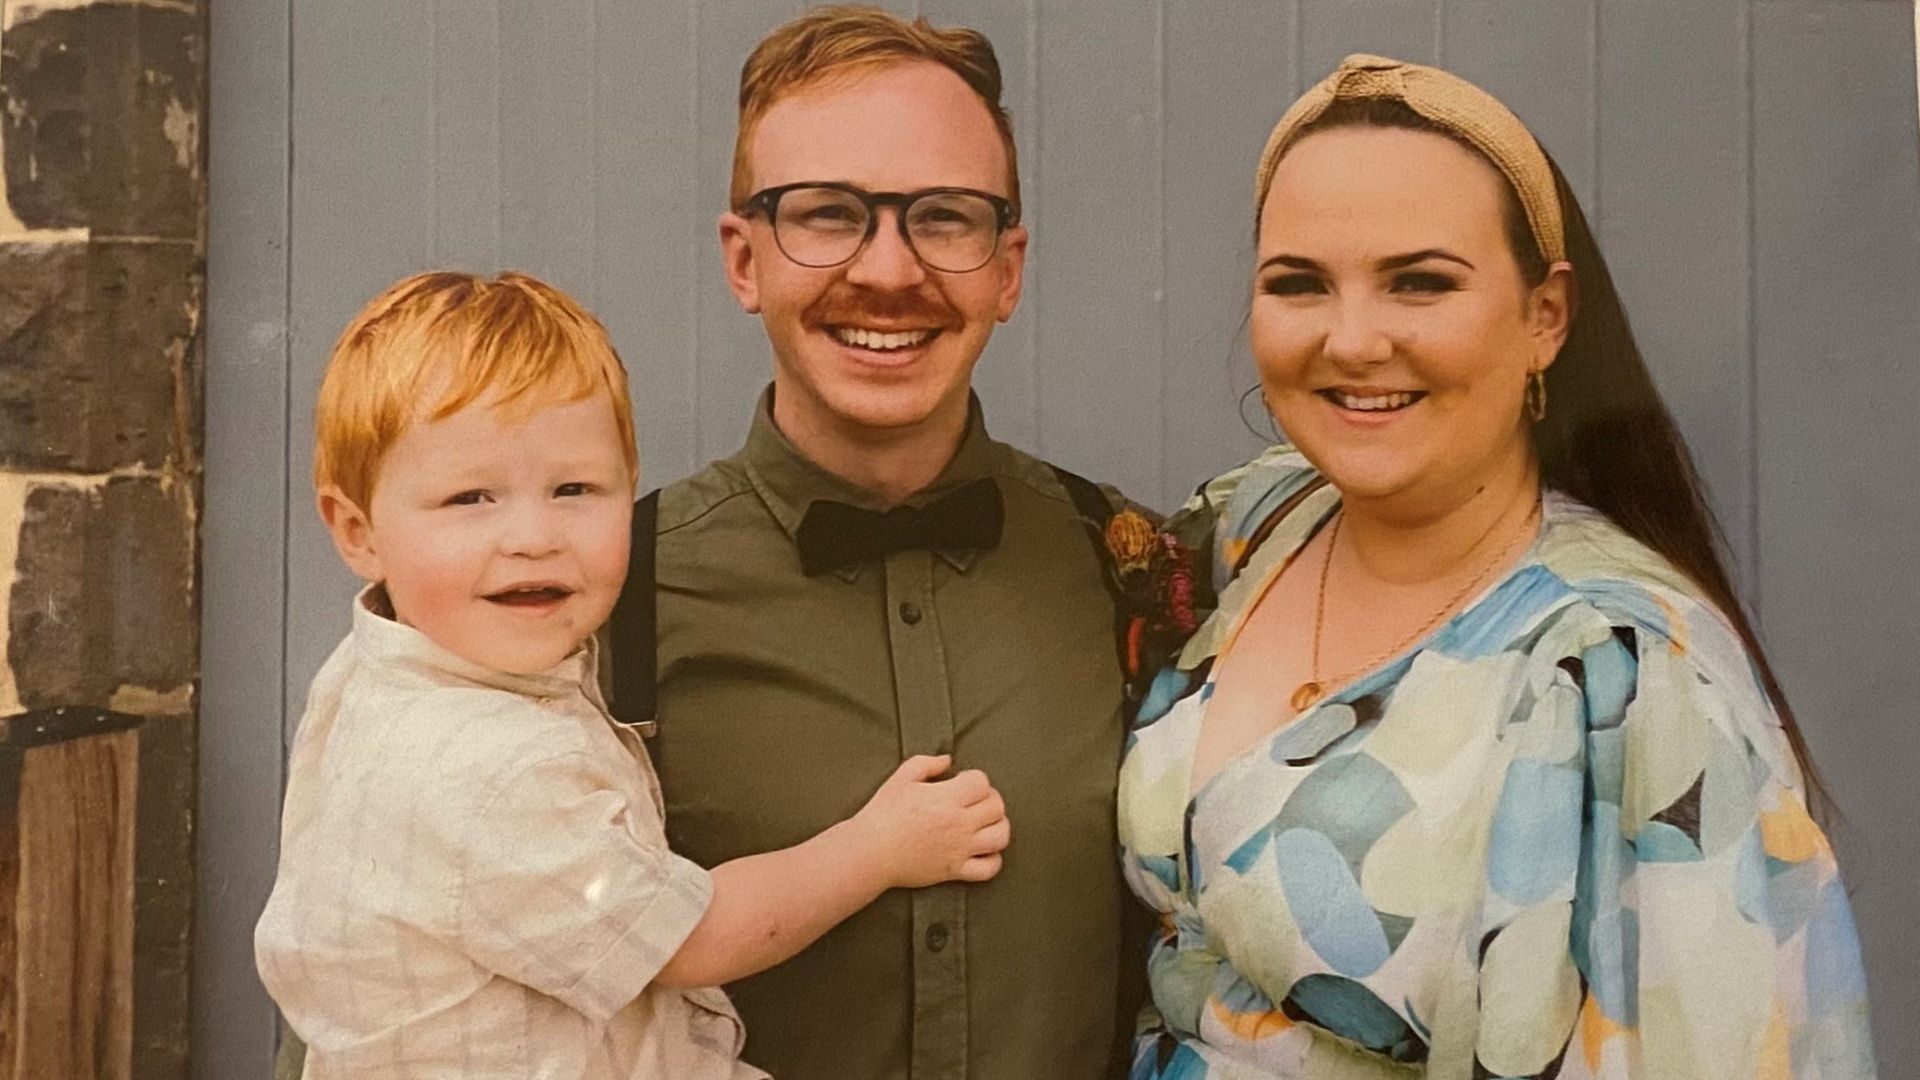 Larson, a young boy with red hair and an adorable smile, is being held by his parents